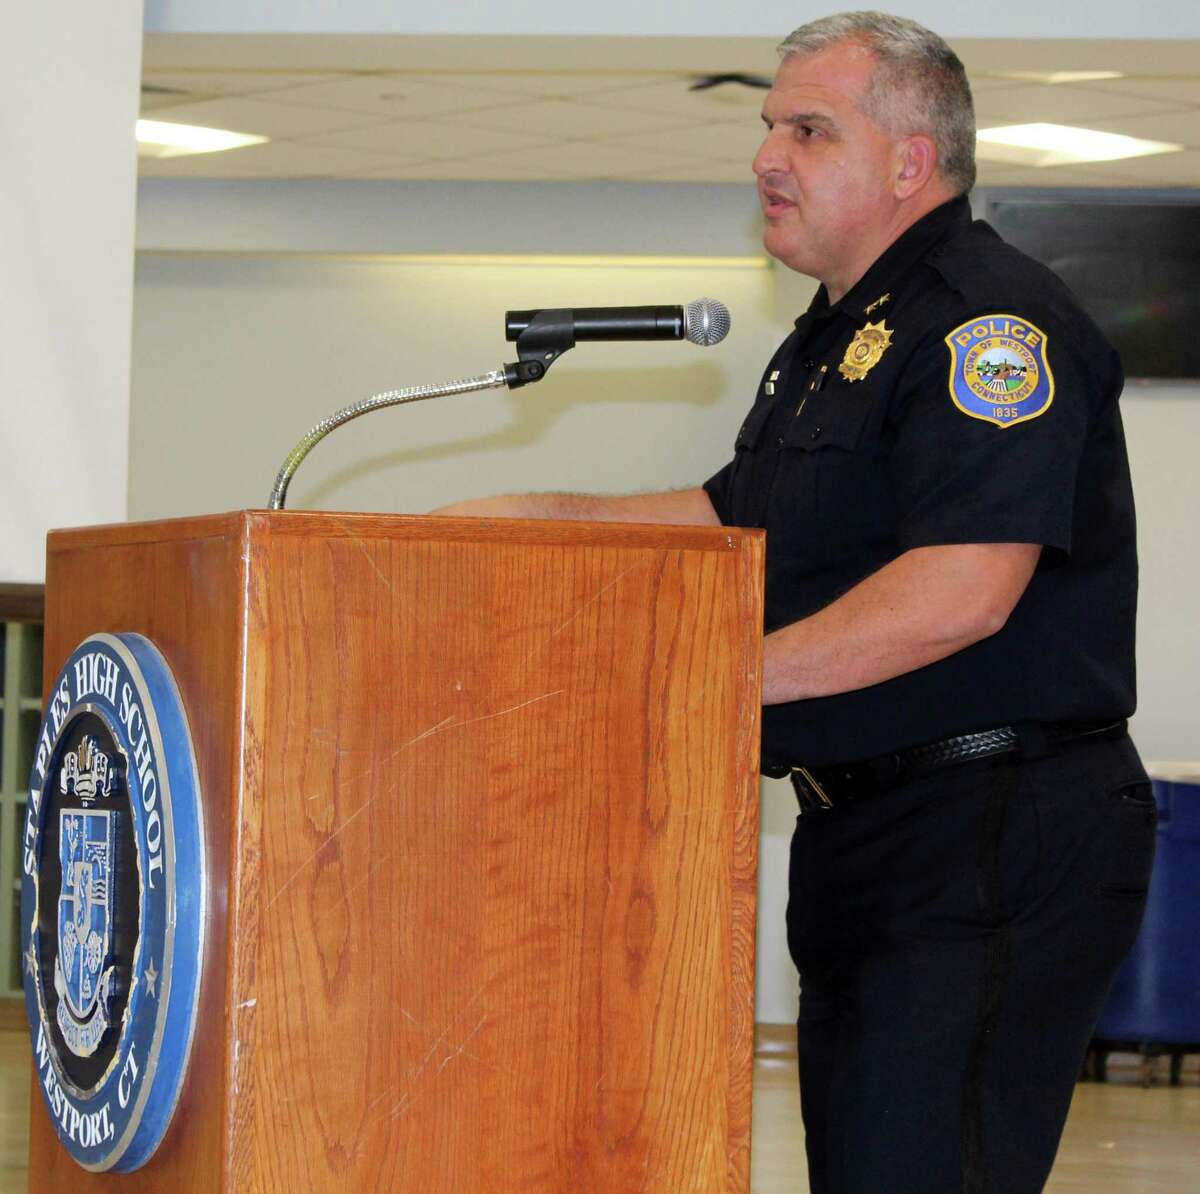 In this file photo, Westport Police Chief Foti Koskinas speaking at a Board of Education meeting at Staples High School.